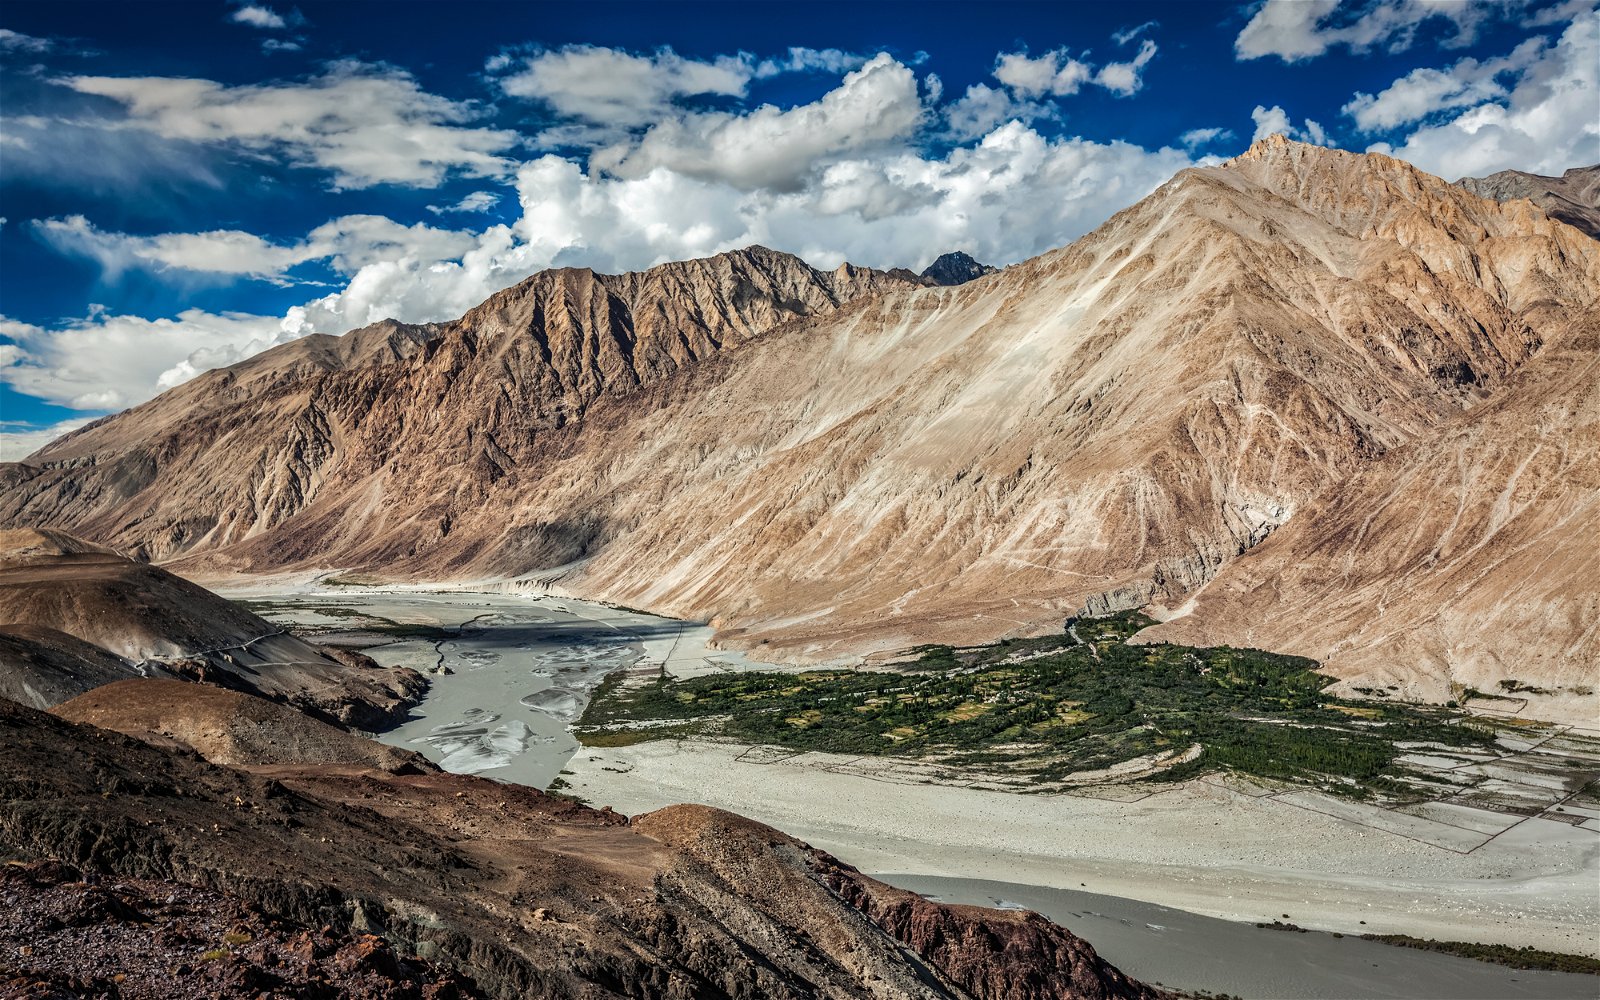 Peaks and Passes of the Nubra Valley